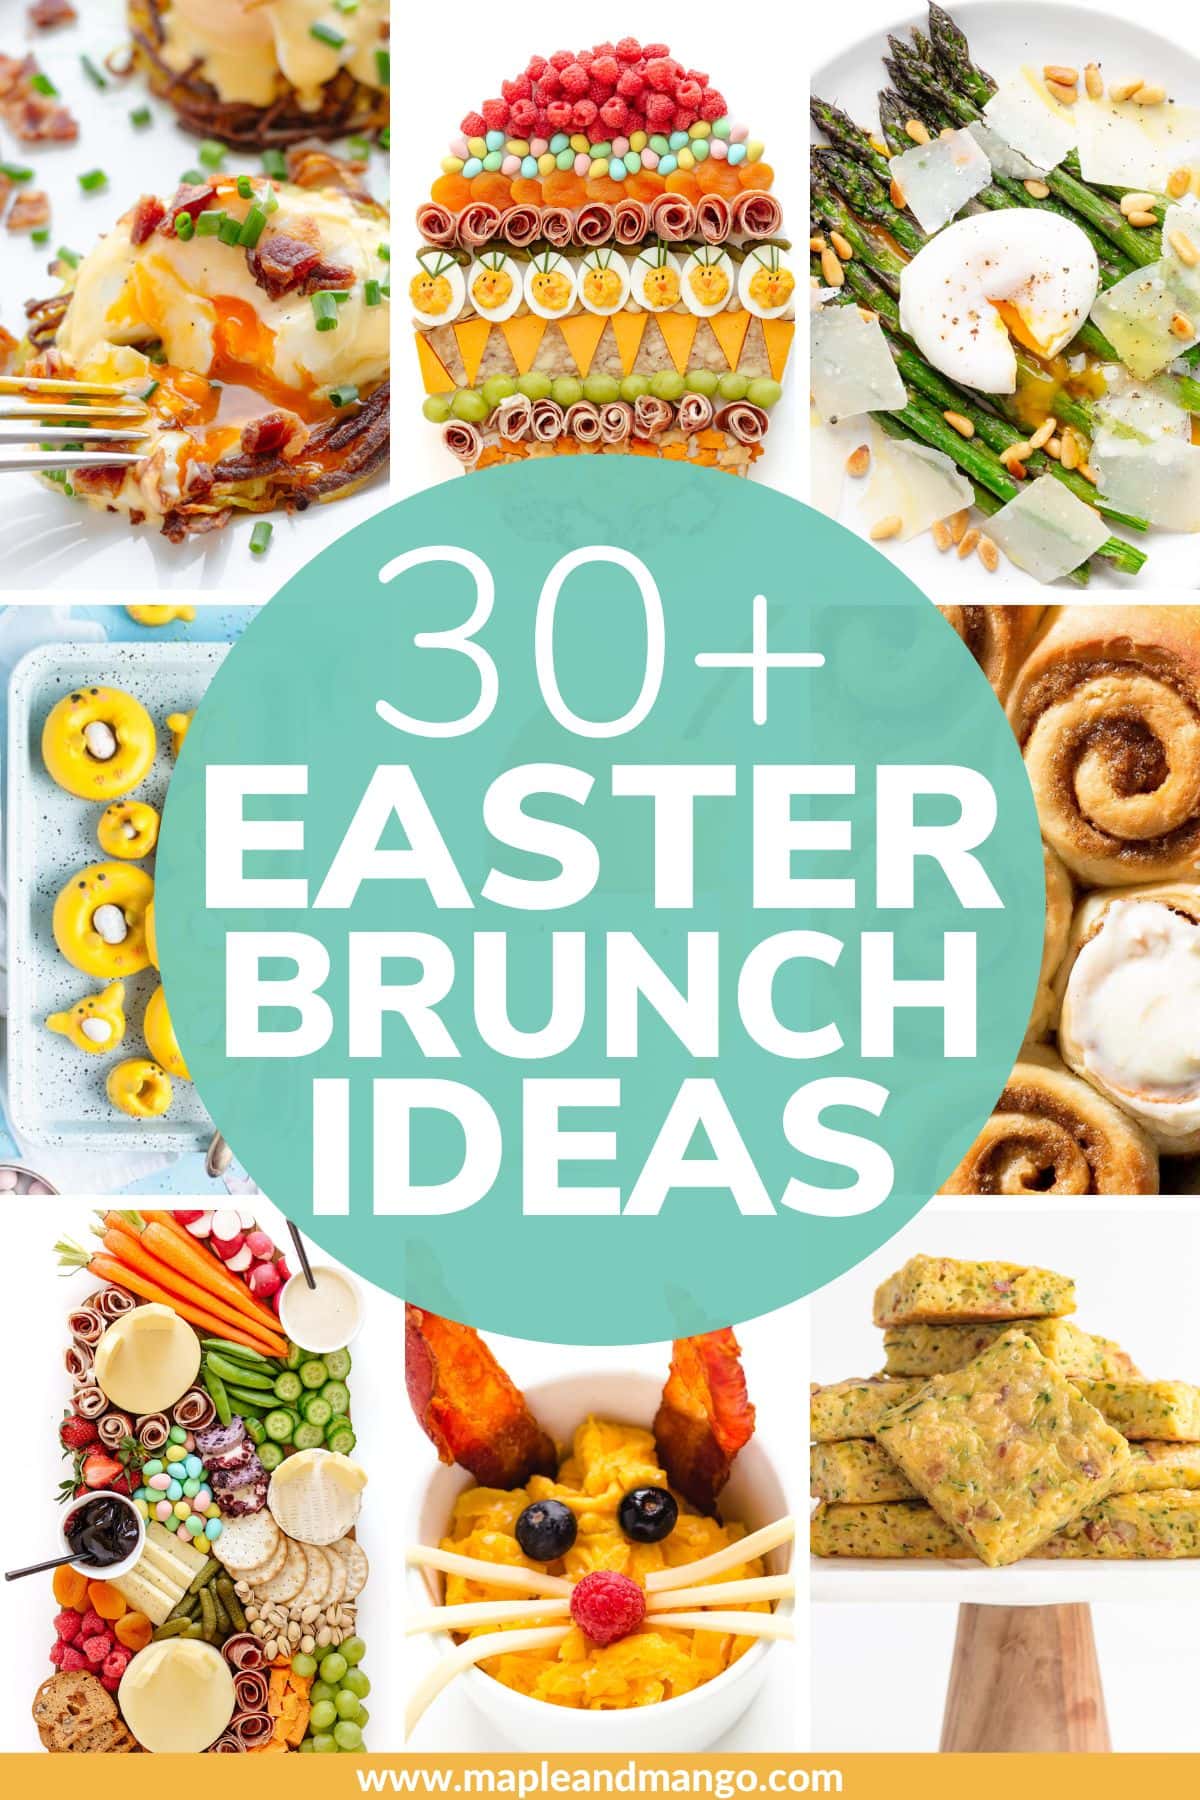 Collage graphic of Easter brunch recipes with text overlay that reads "30+ Easter Brunch Ideas".